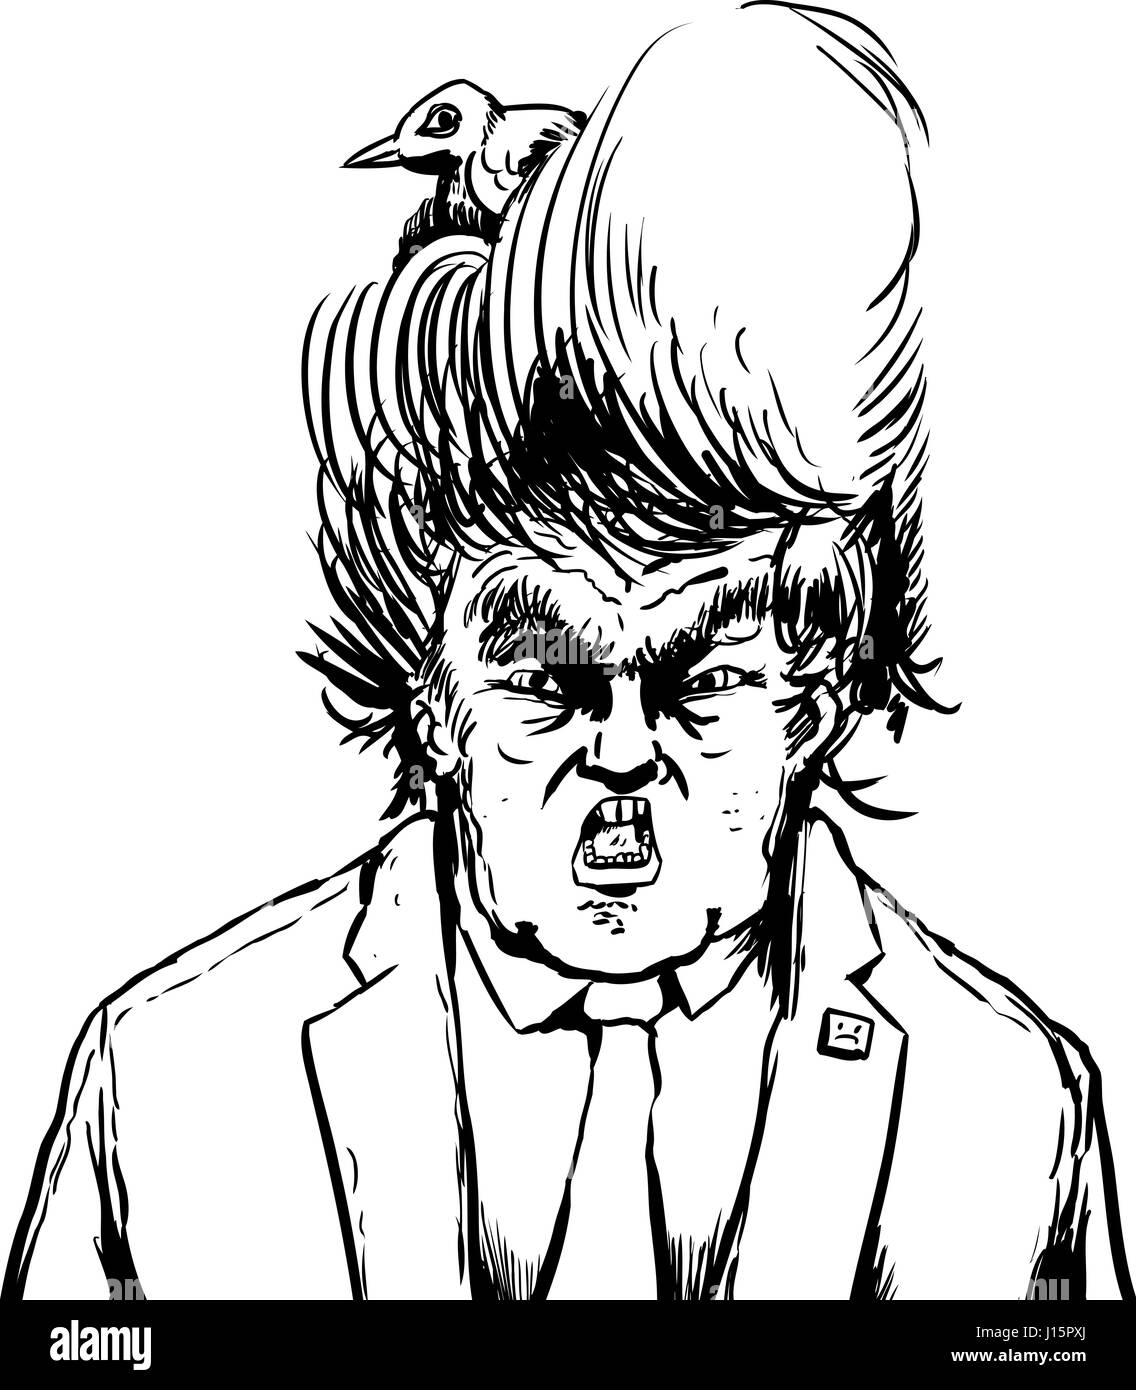 April 18, 2017. Caricature outline of yelling Donald Trump with bird nesting in his hair Stock Photo